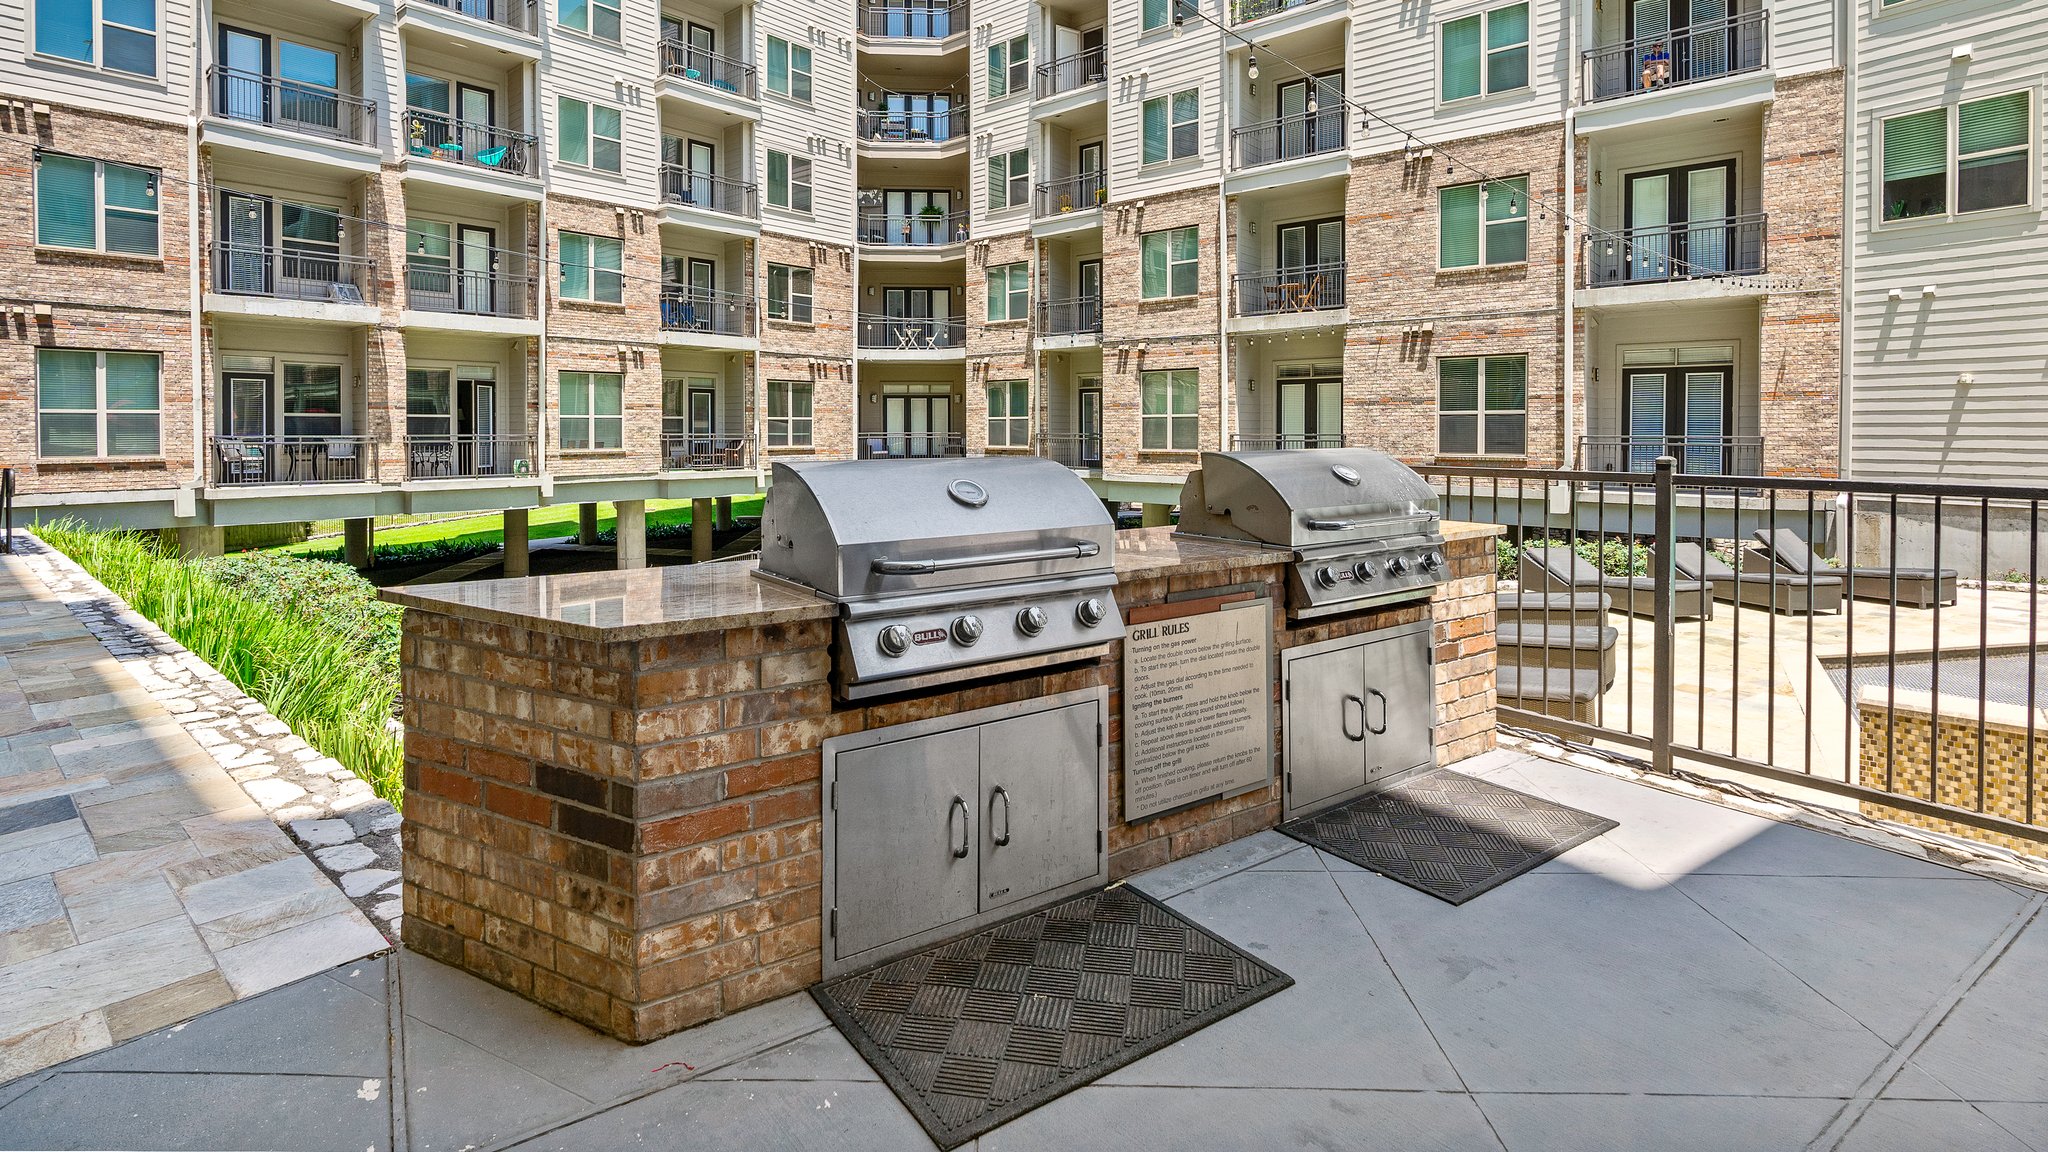 The communal outdoor grills